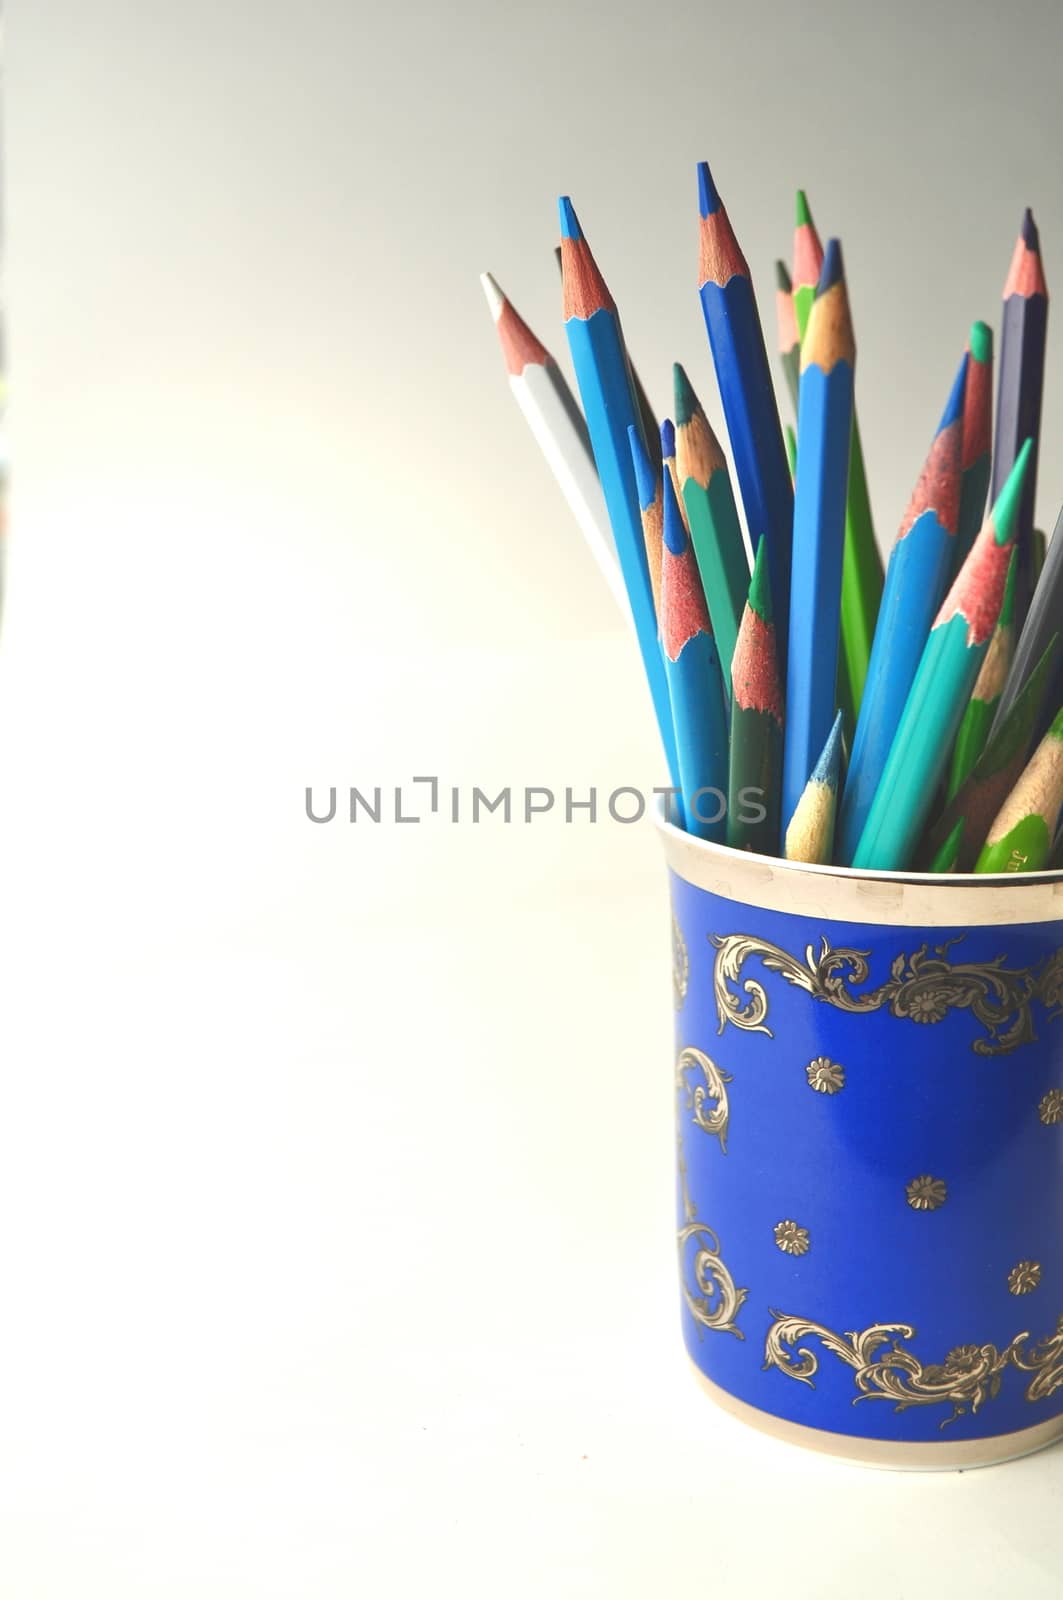 Blue porcelain cup with colorful pencils on grey, white and blue background with copy space by Akvals